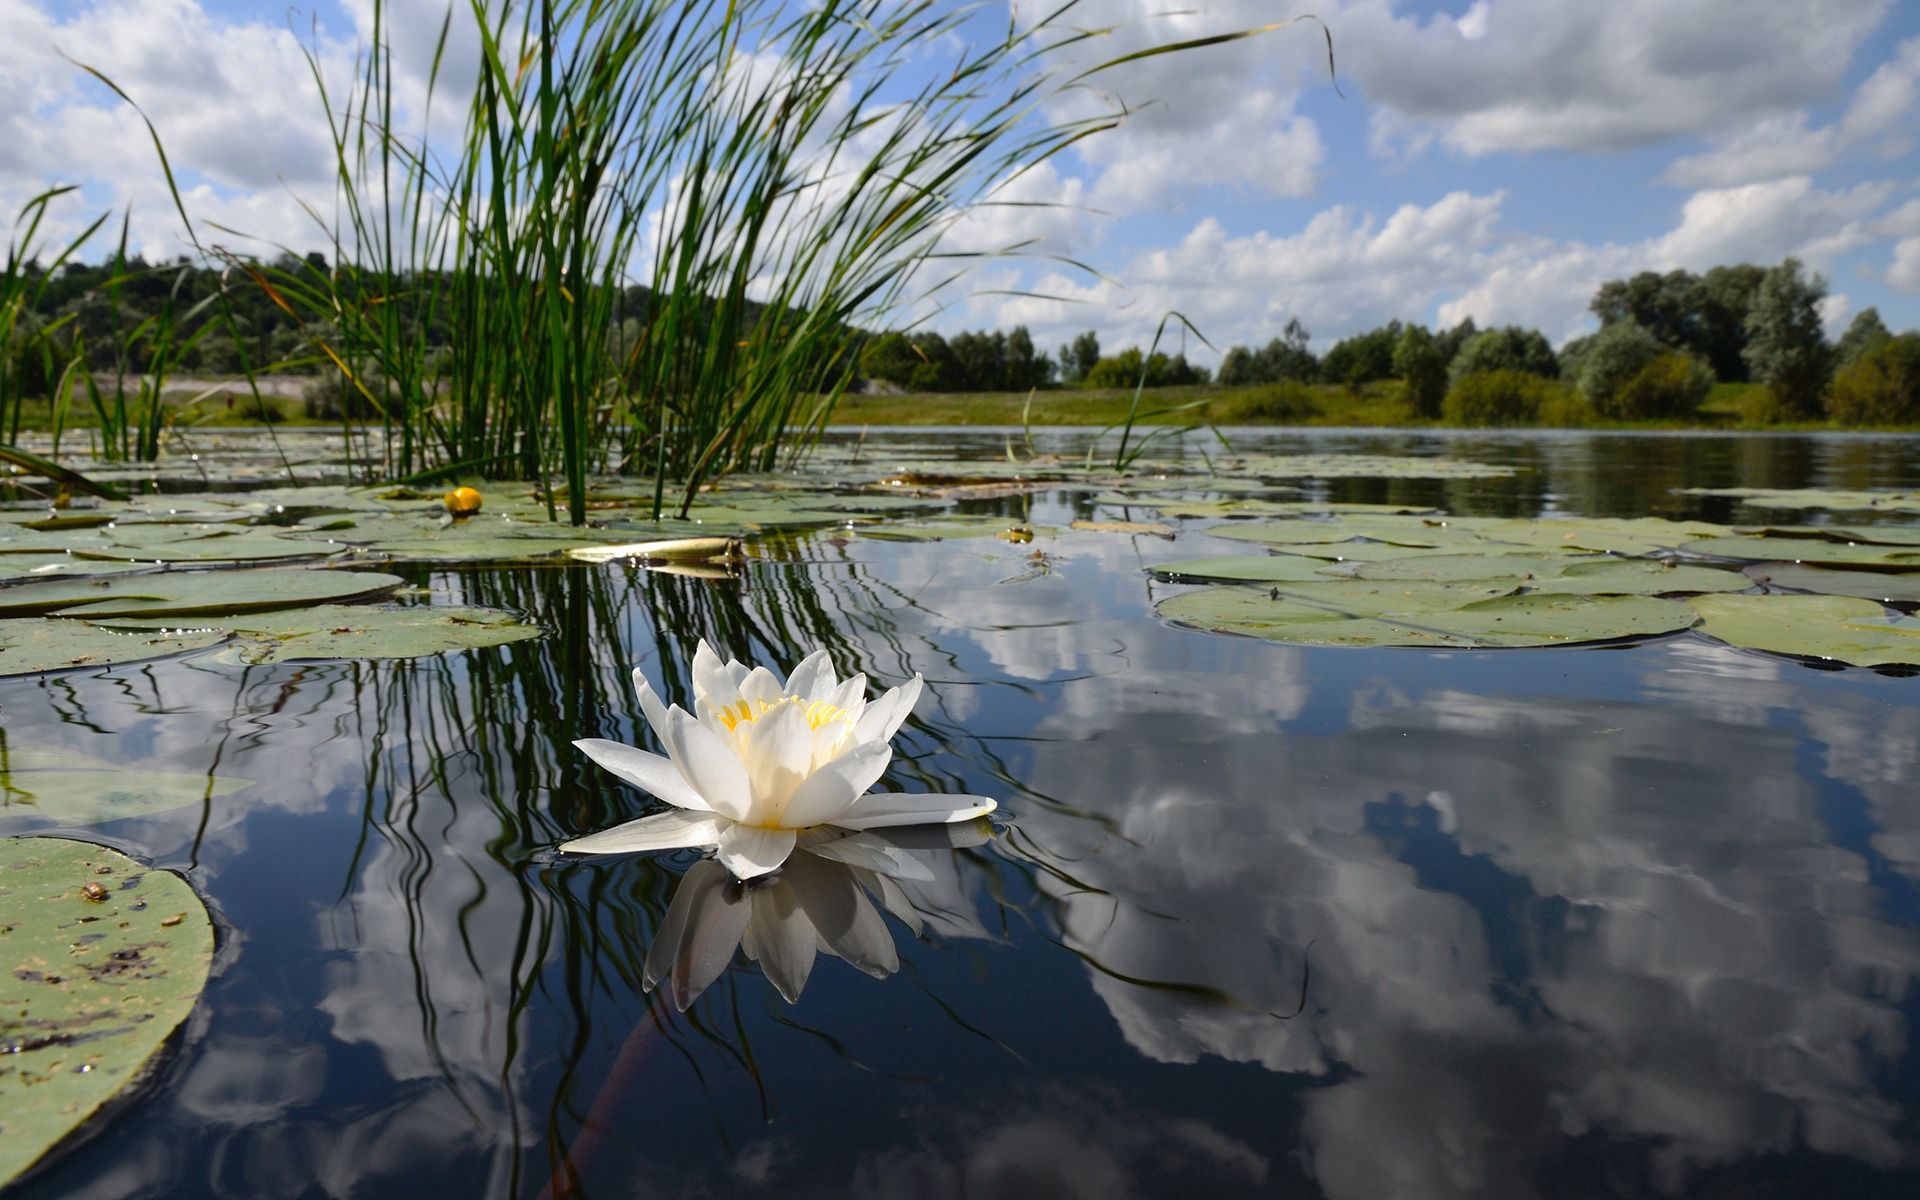 lake, reflection, water lily, nature, flower, clouds, lily, mirror